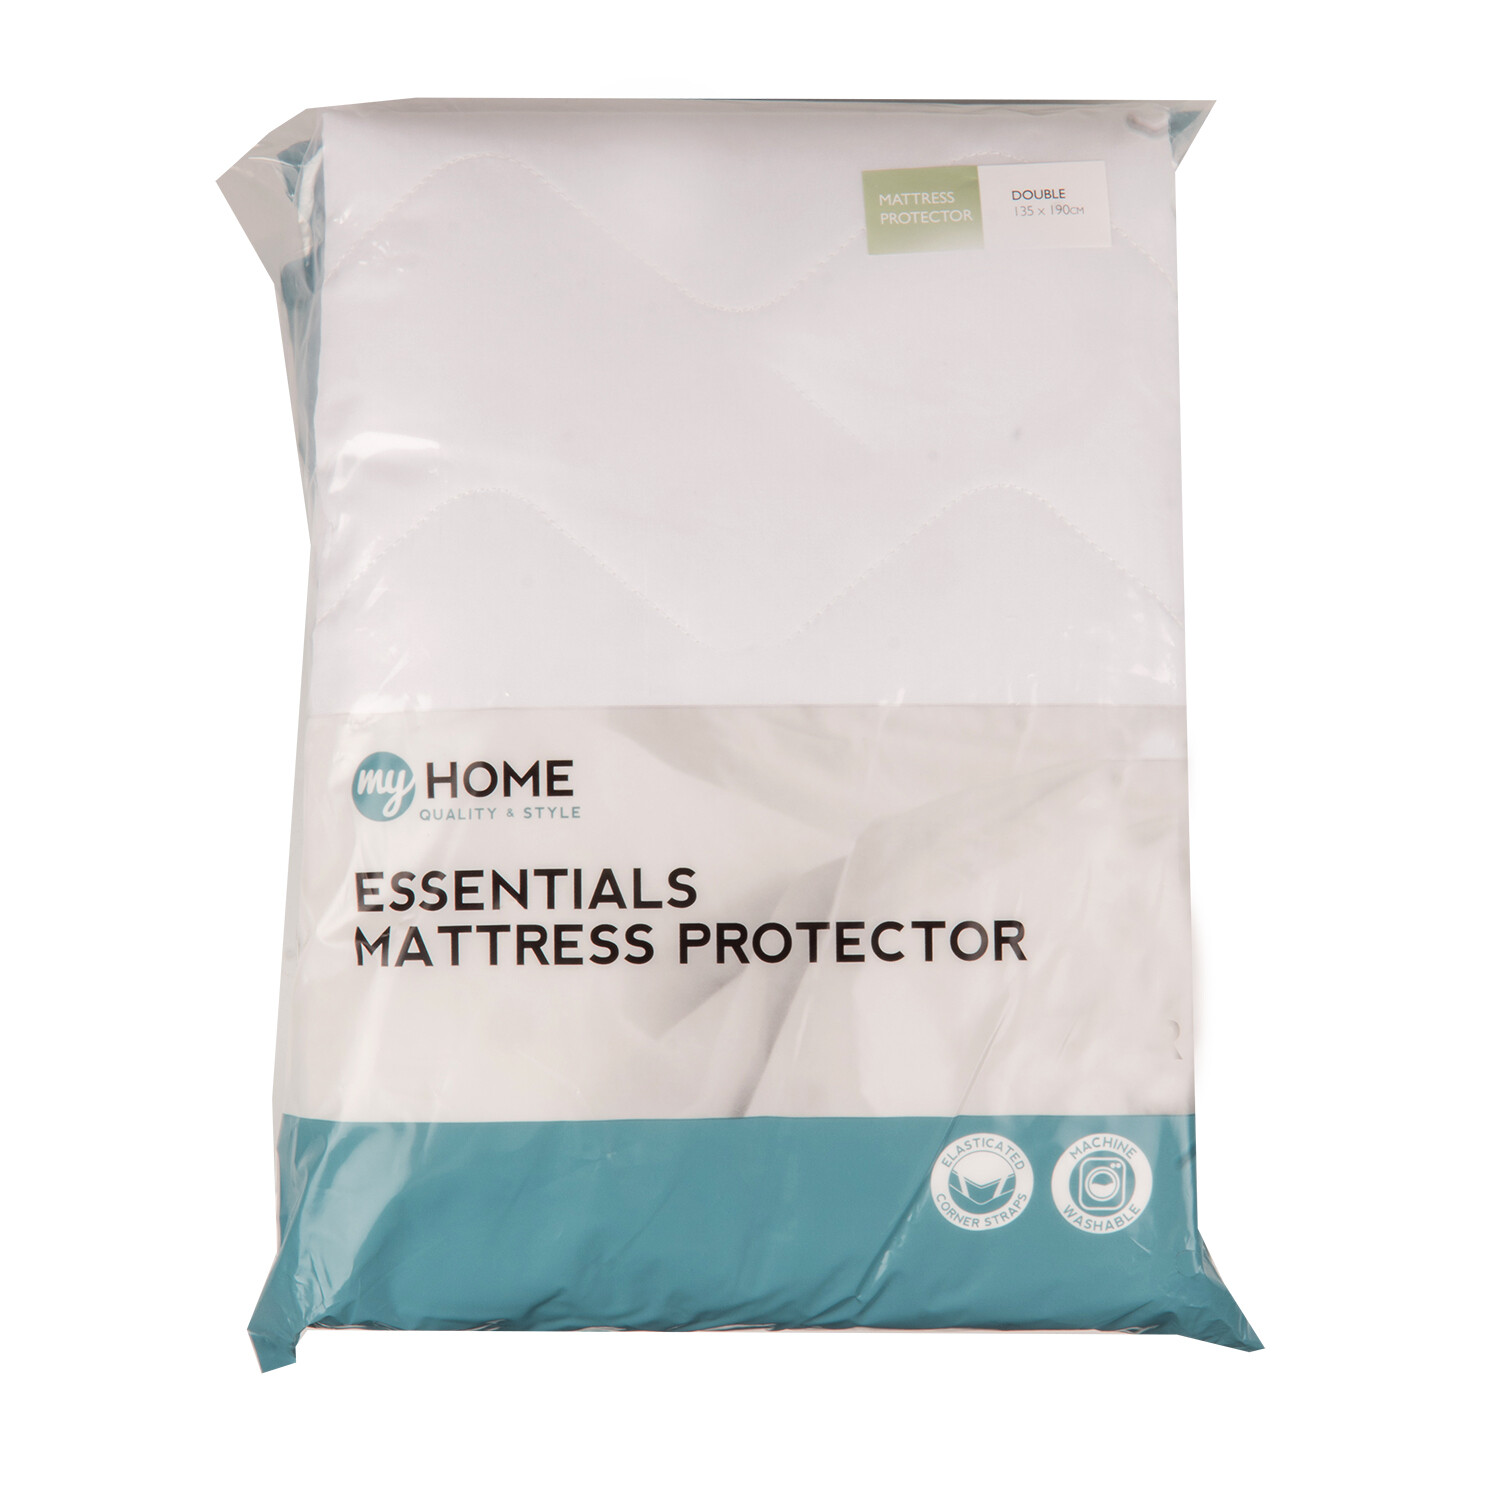 My Home Essentials Double White Mattress Protector Image 2